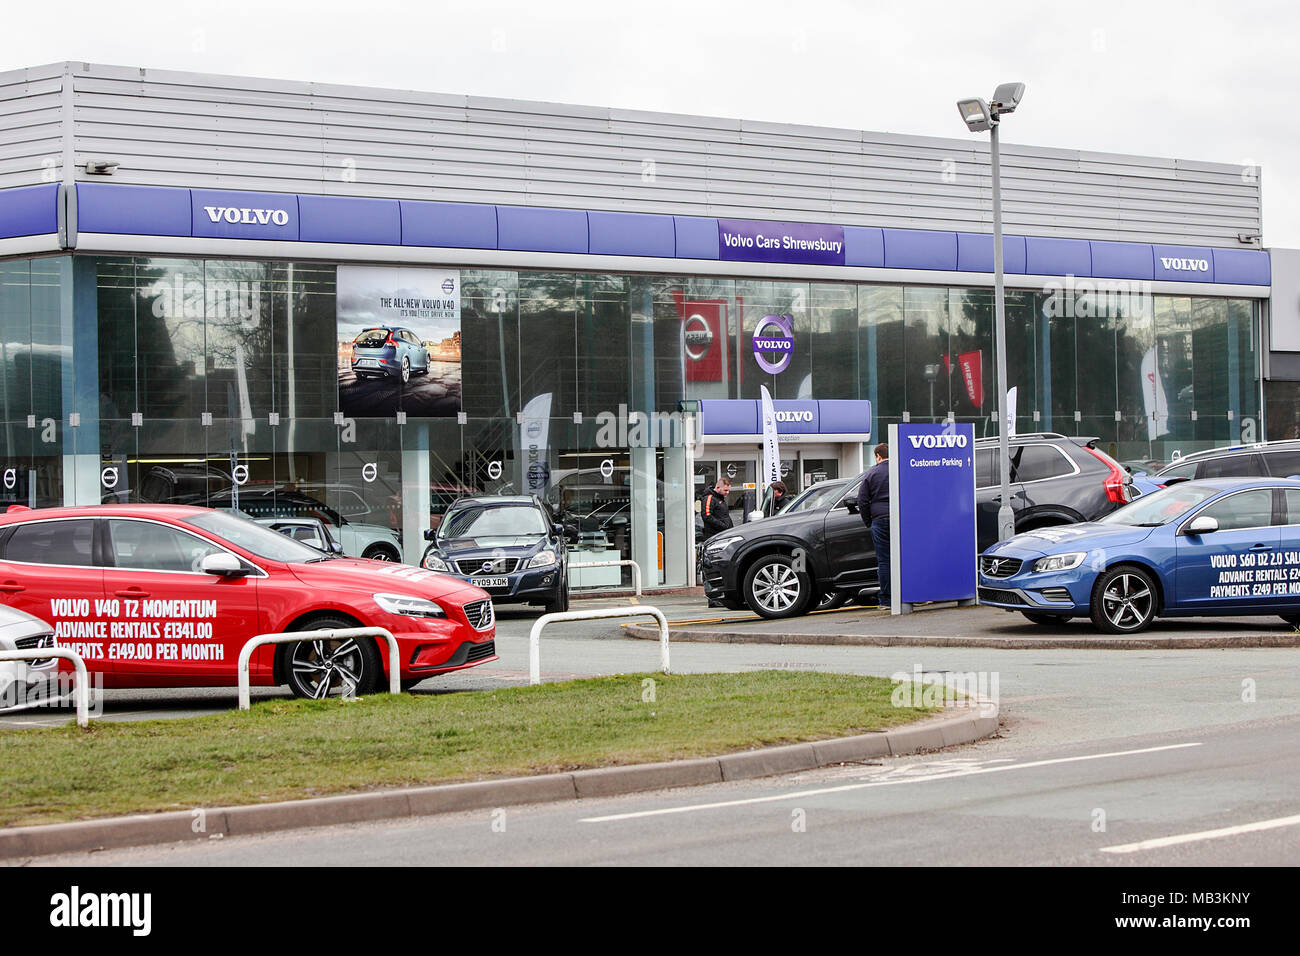 One of (20) images in this short set related to various retail, private and NHS properties in the Shrewsbury area. Volvo Car dealership viewed here. Stock Photo